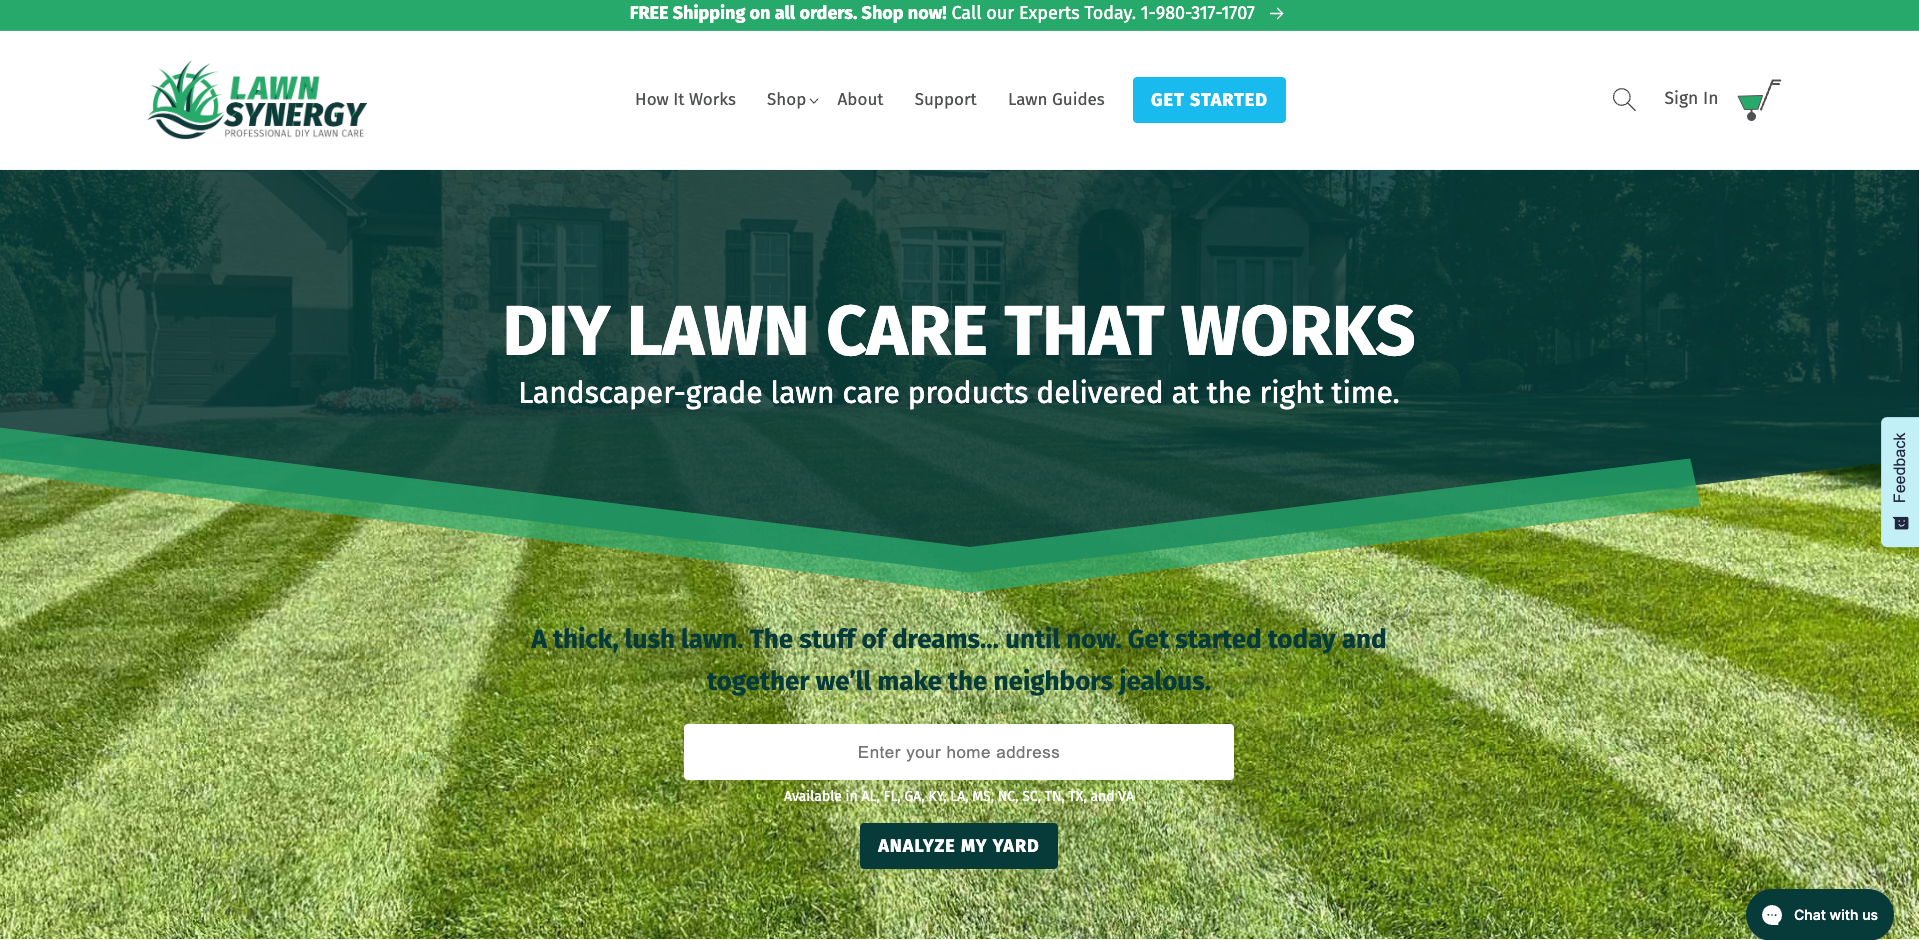 Lawn Synergy homepage